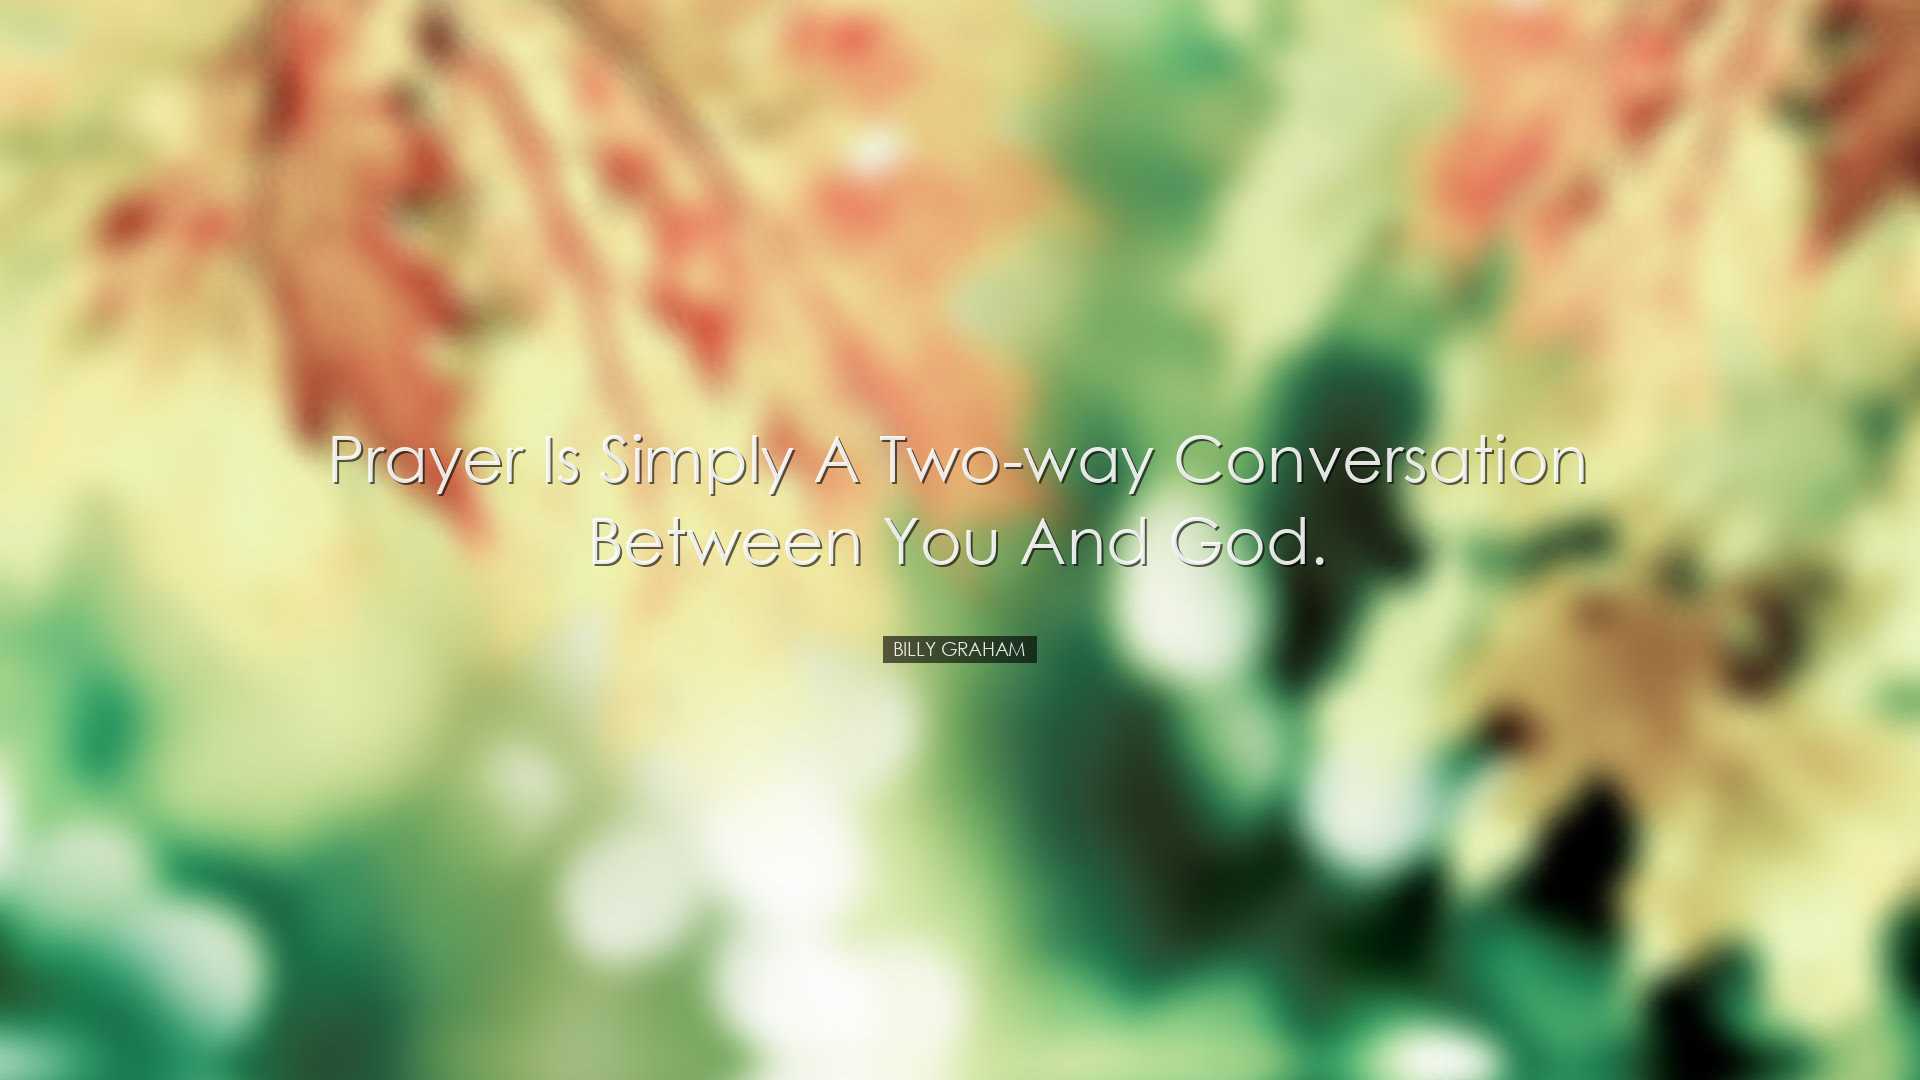 Prayer is simply a two-way conversation between you and God. - Bil